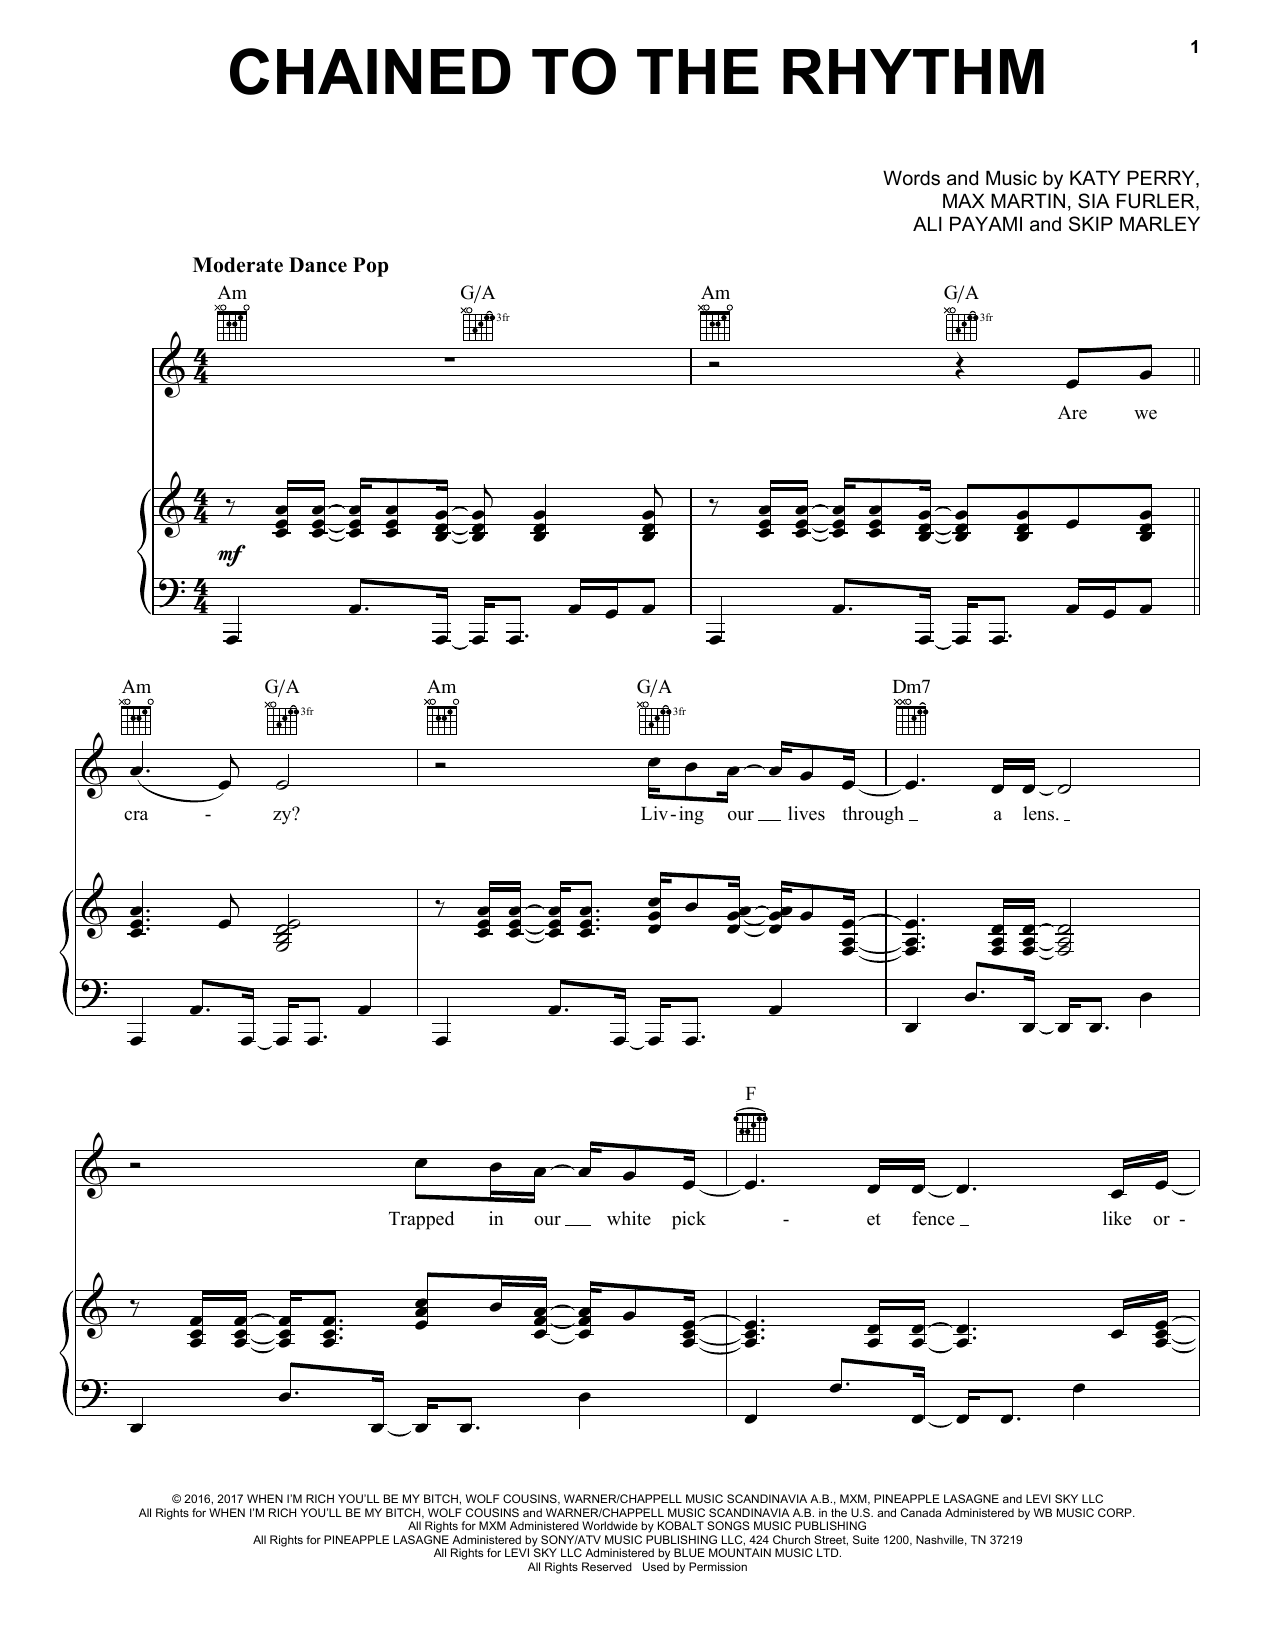 Download Katy Perry Chained To The Rhythm Sheet Music